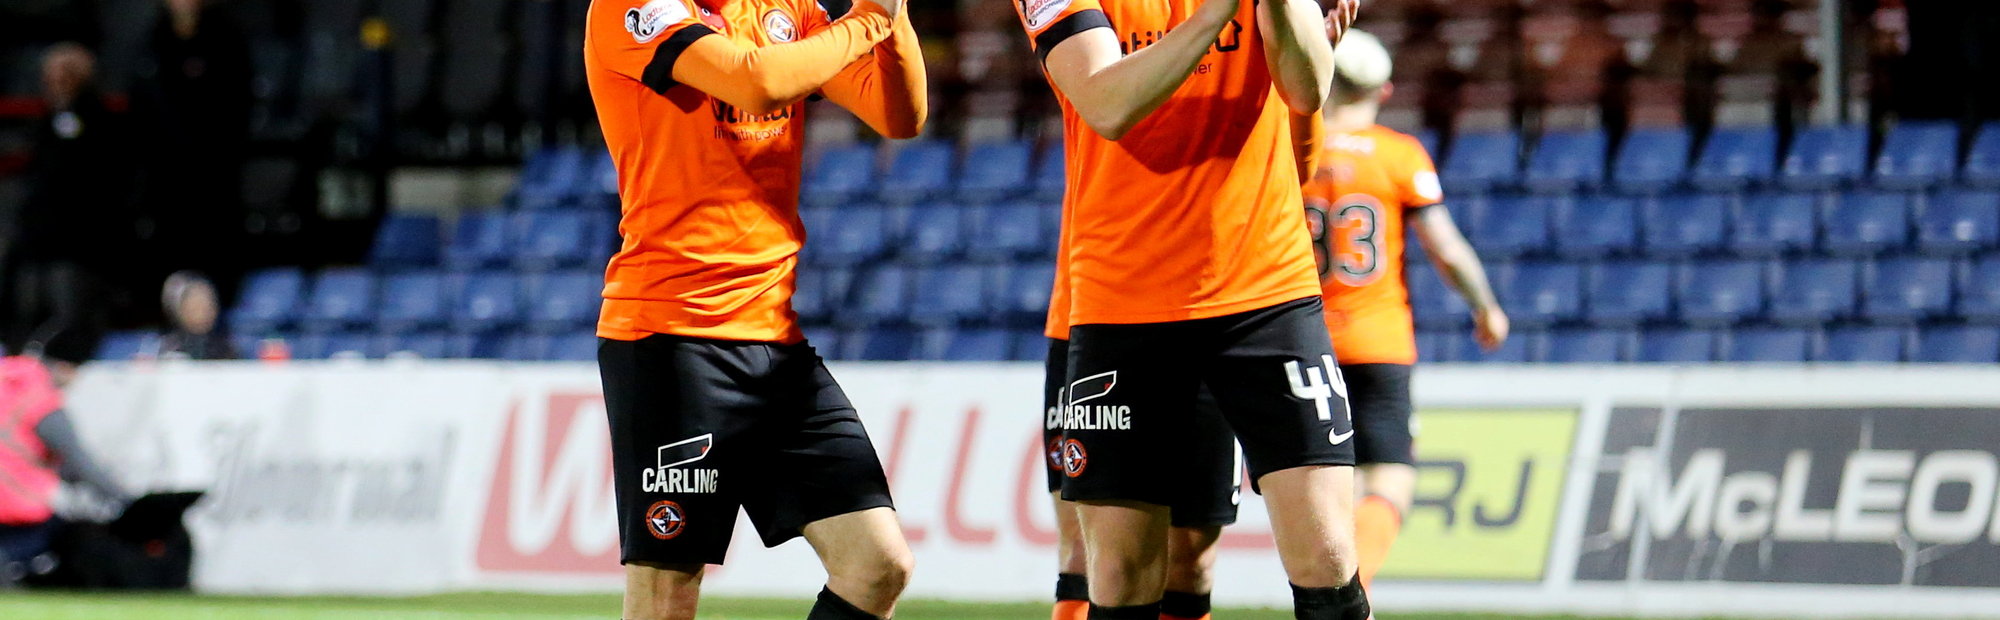 CLEAN SHEETS OVER GOALS FOR WATSON | Dundee United Football Club